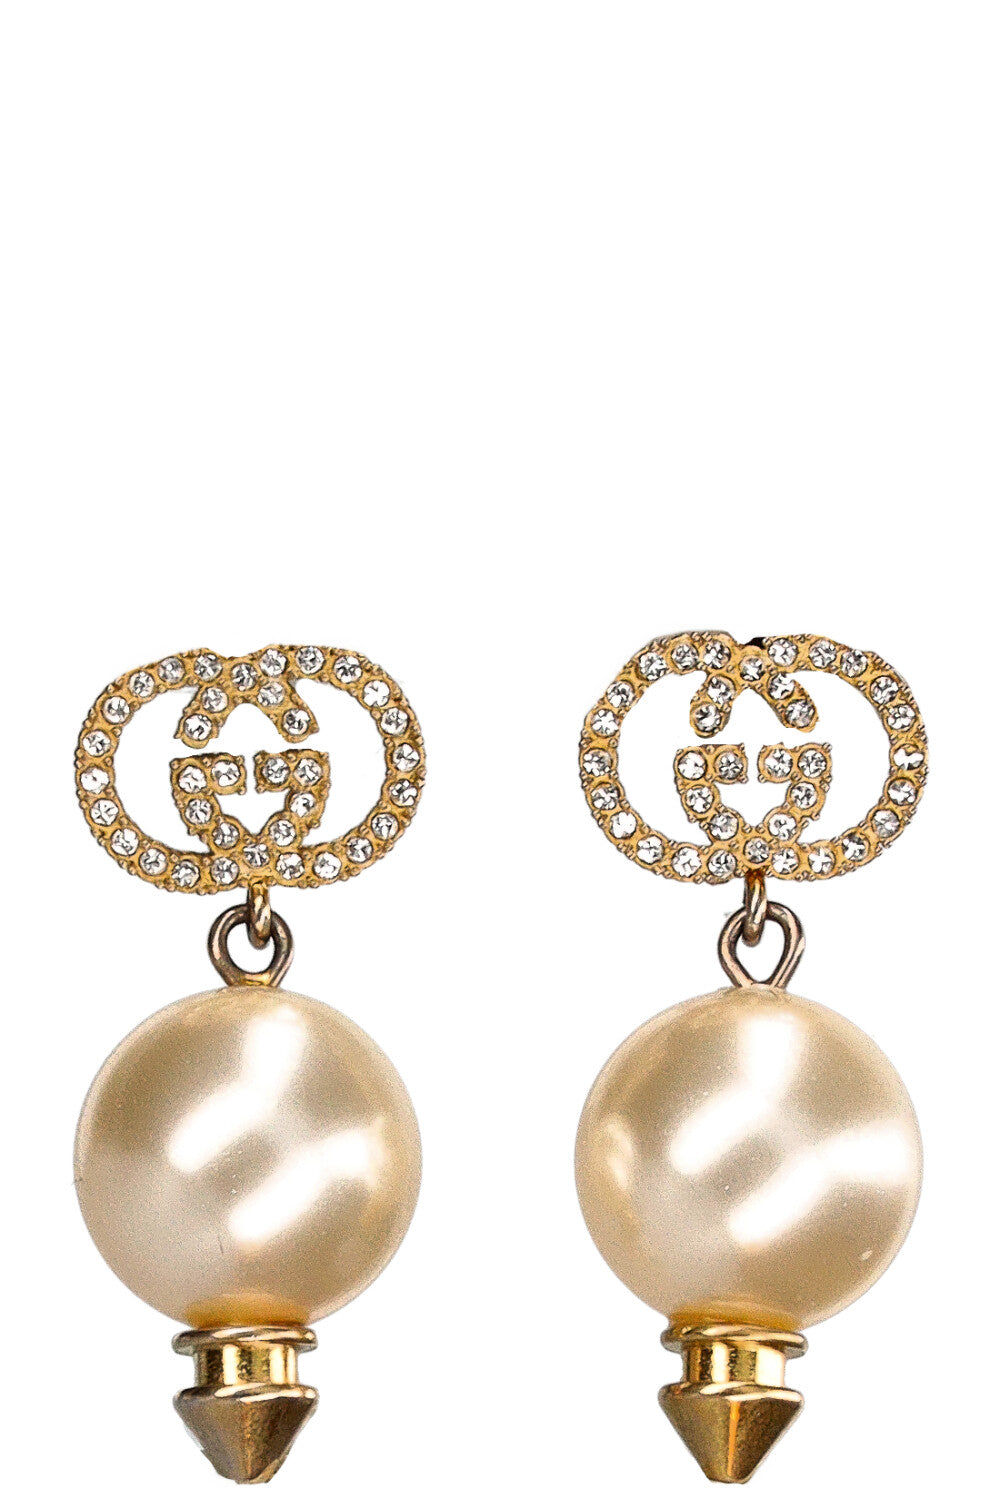 GG earrings with faux pearls in gold - Gucci